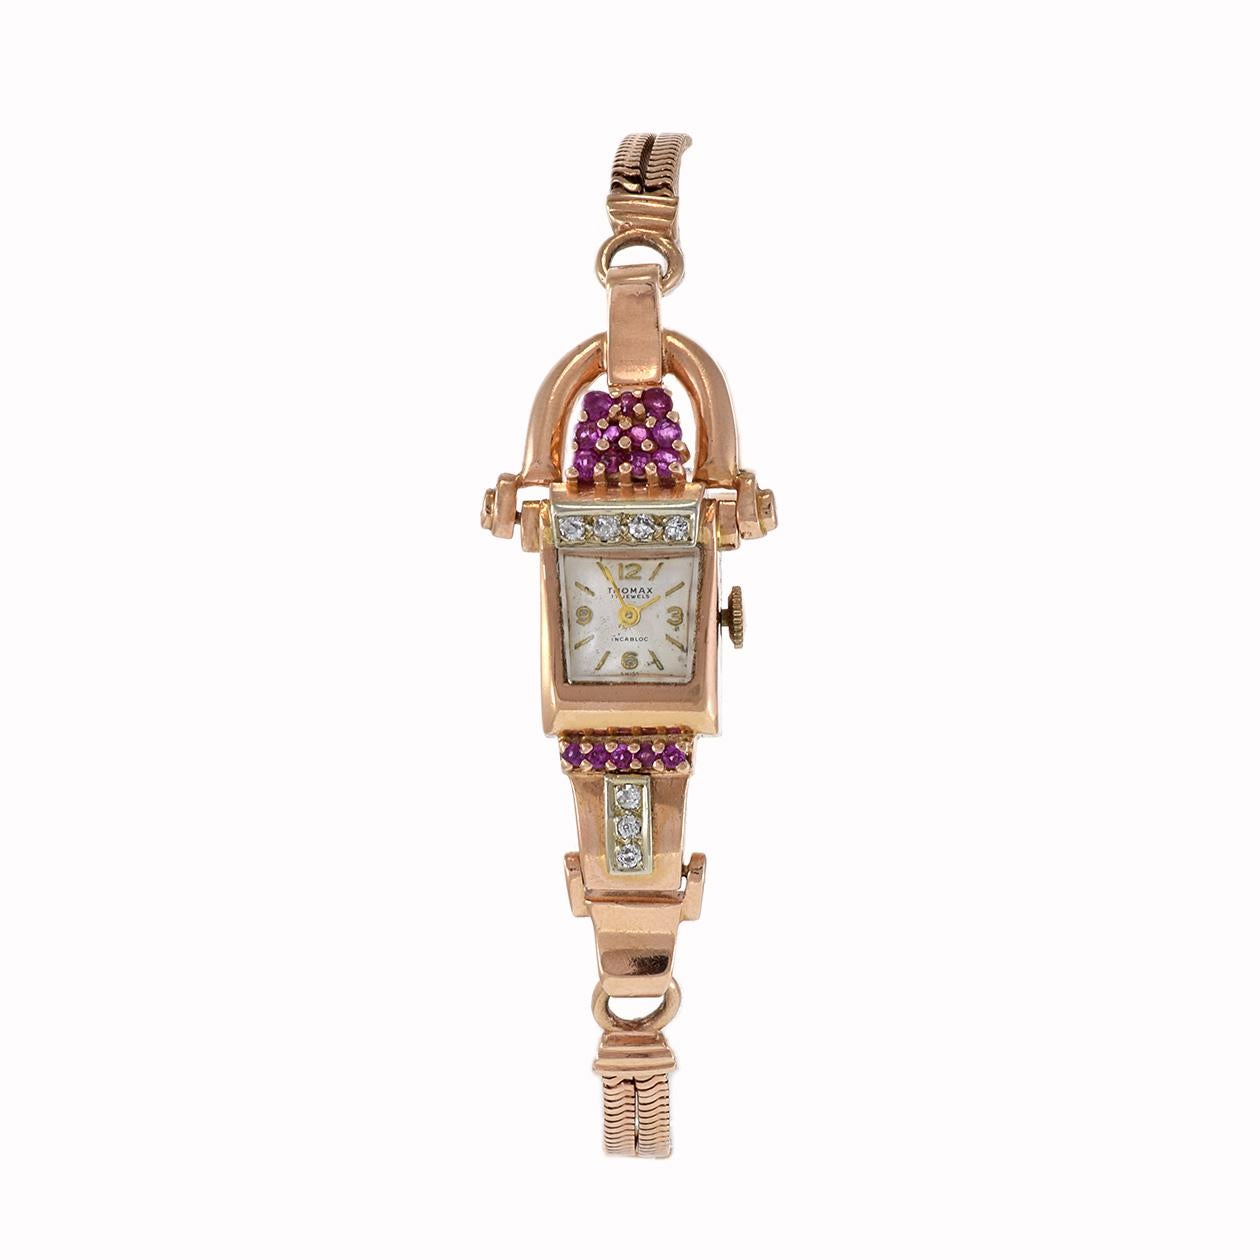 Introducing the exquisite Thomax 1950's Ladies Ruby and Diamond Cocktail Watch, a timeless embodiment of luxury and elegance. Crafted with precision, this captivating timepiece features a 14kt pink gold case and bracelet adorned with radiant rubies